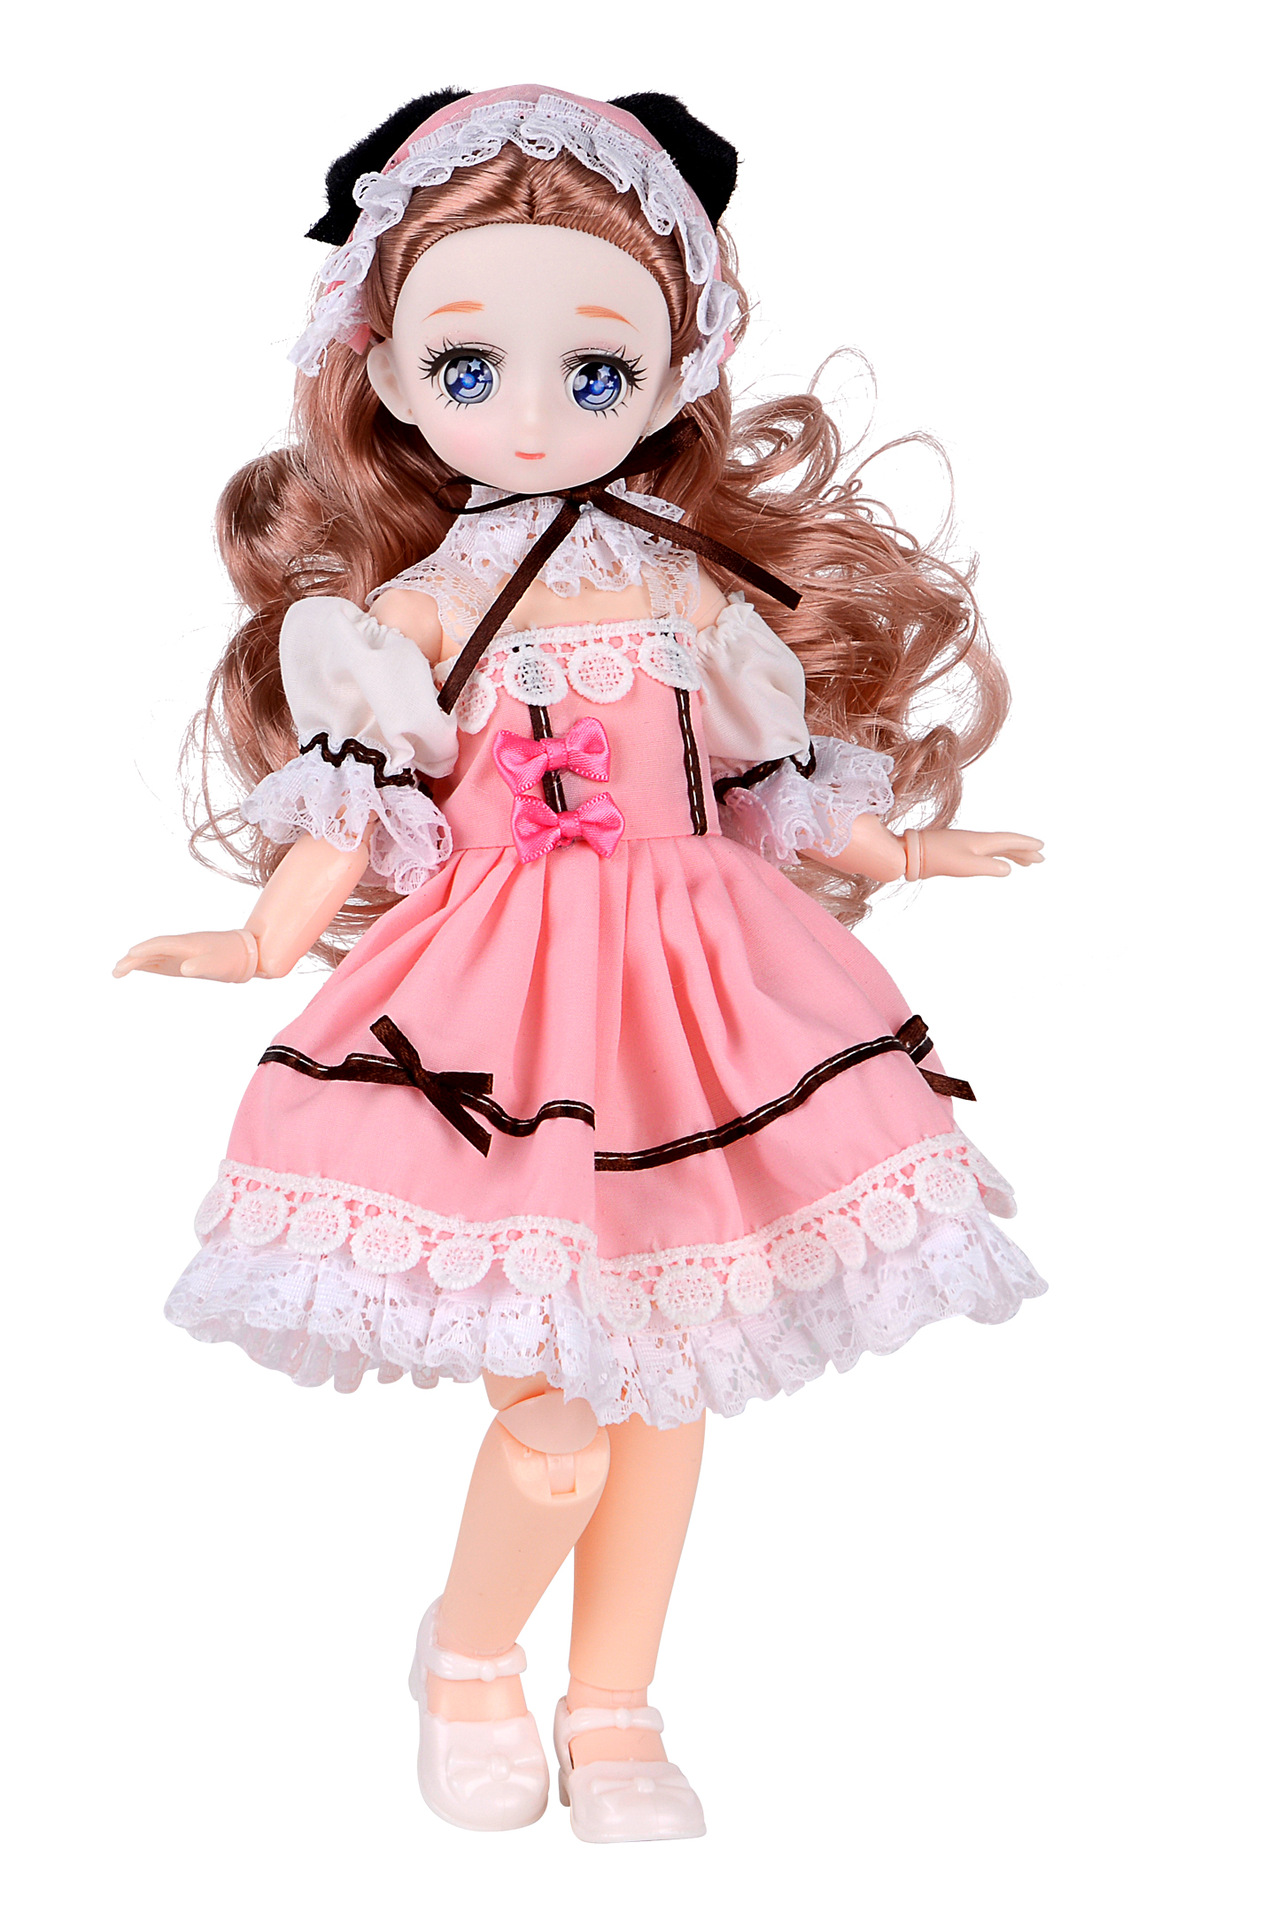 5D Eye Multi-Joint 6 Points BJD Doll Princess 30cm Two-Dimensional Doll Clothes Girls Playing House Toy